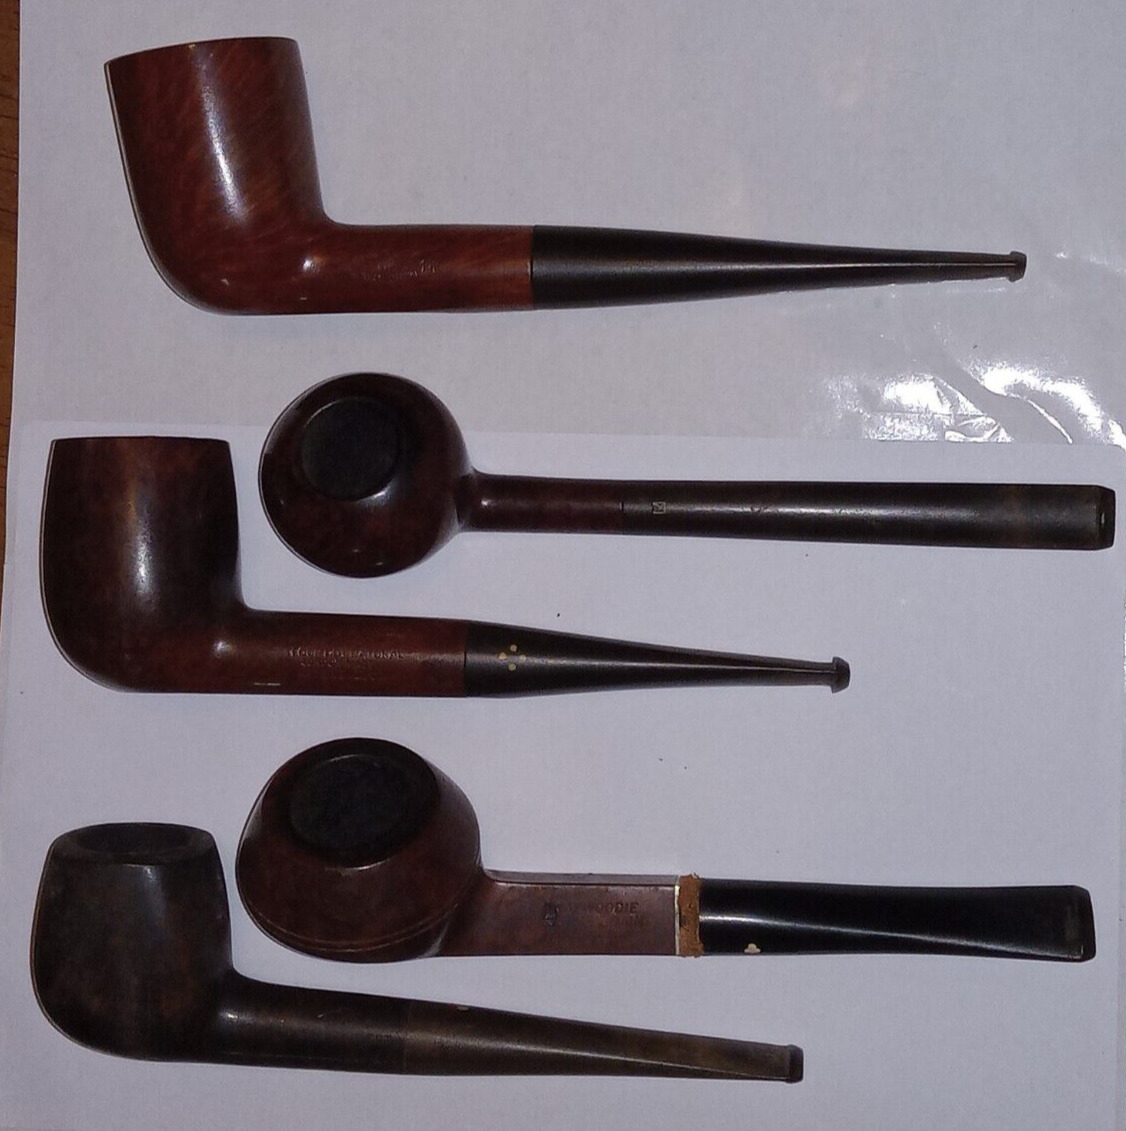 Lot of 5 (five) Vintage tobacco smoking pipes from England and France